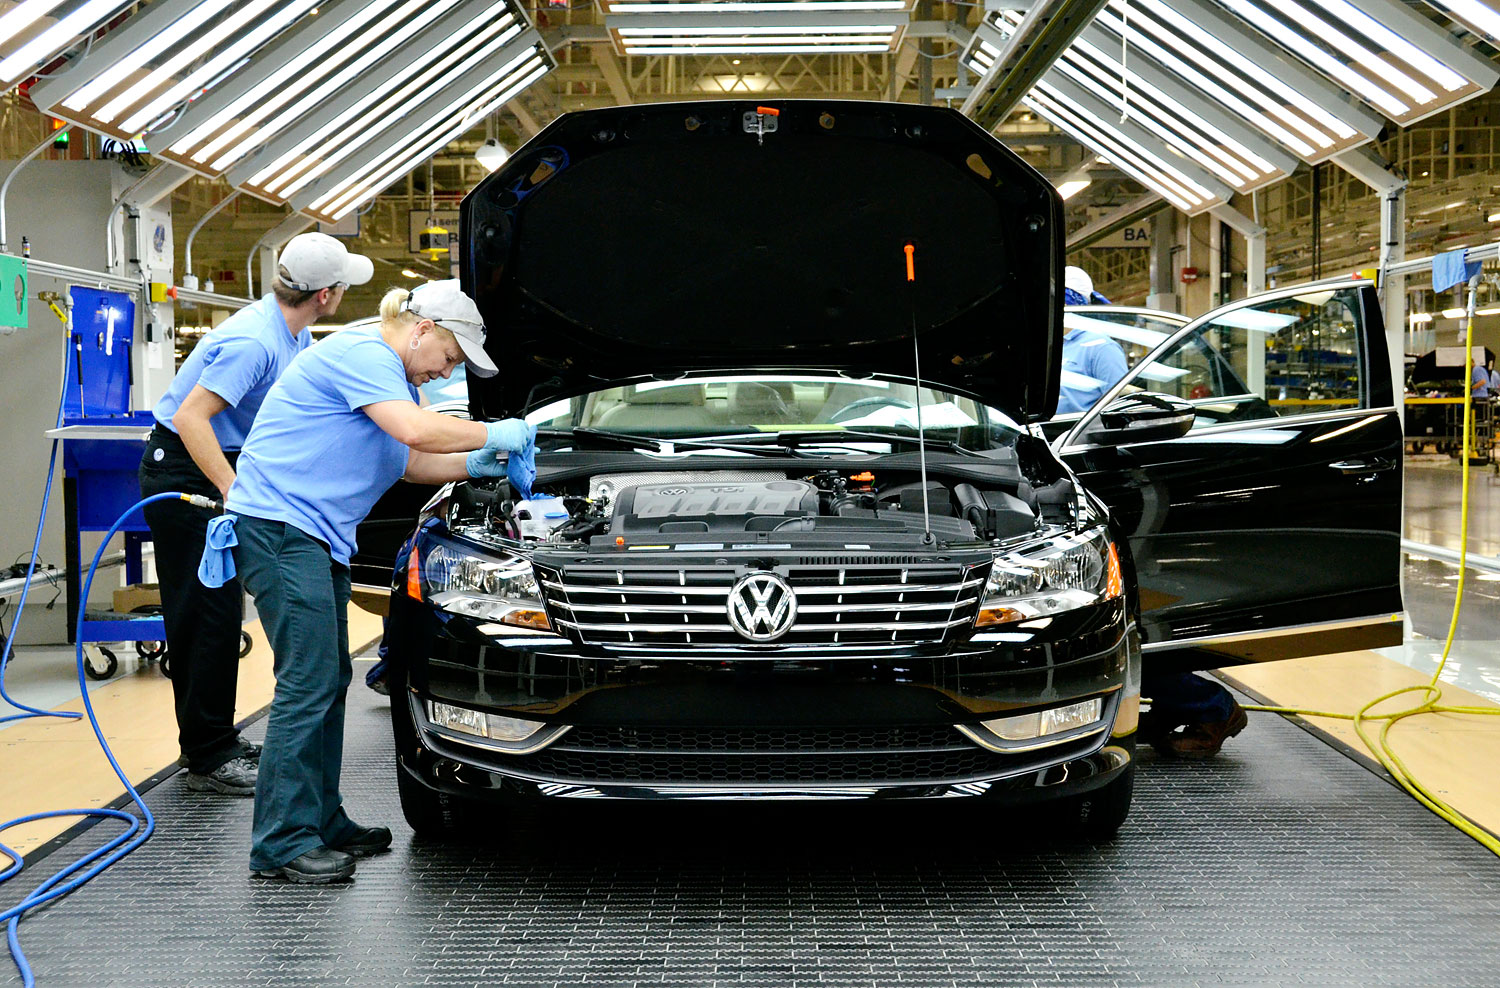 New 2012 VW Passat First Drive And Factory Tour